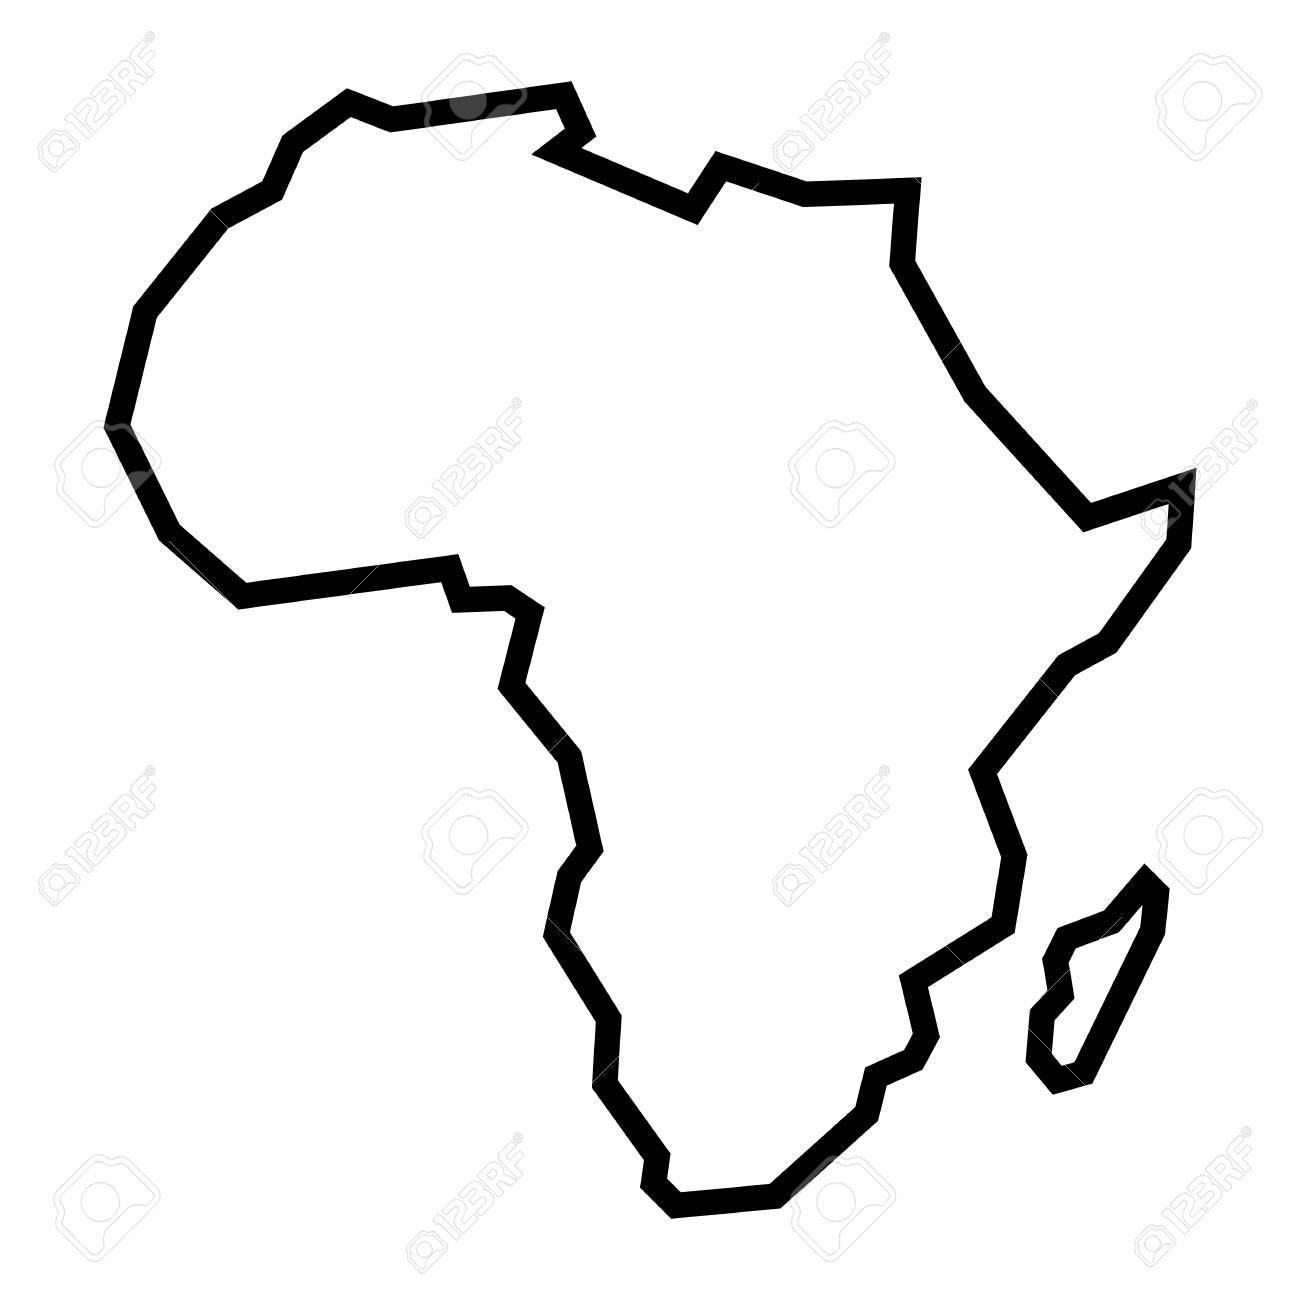 African continent drawing at. Africa clipart outline